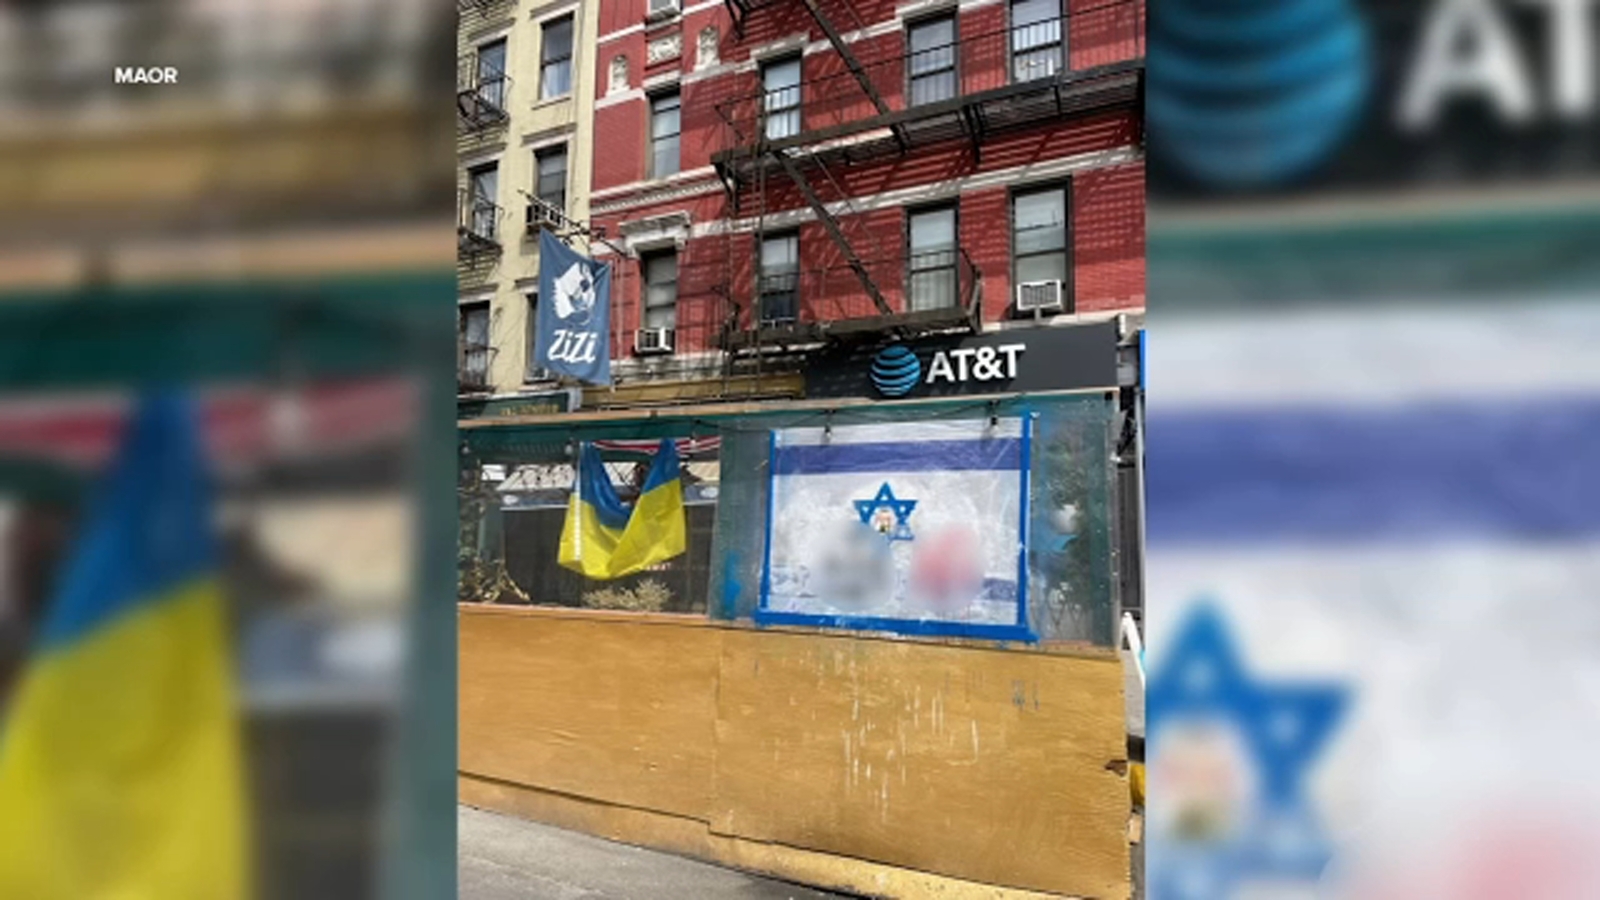 NYC Jewish restaurant owner says swastikas painted, Israeli flag town down in Chelsea [Video]